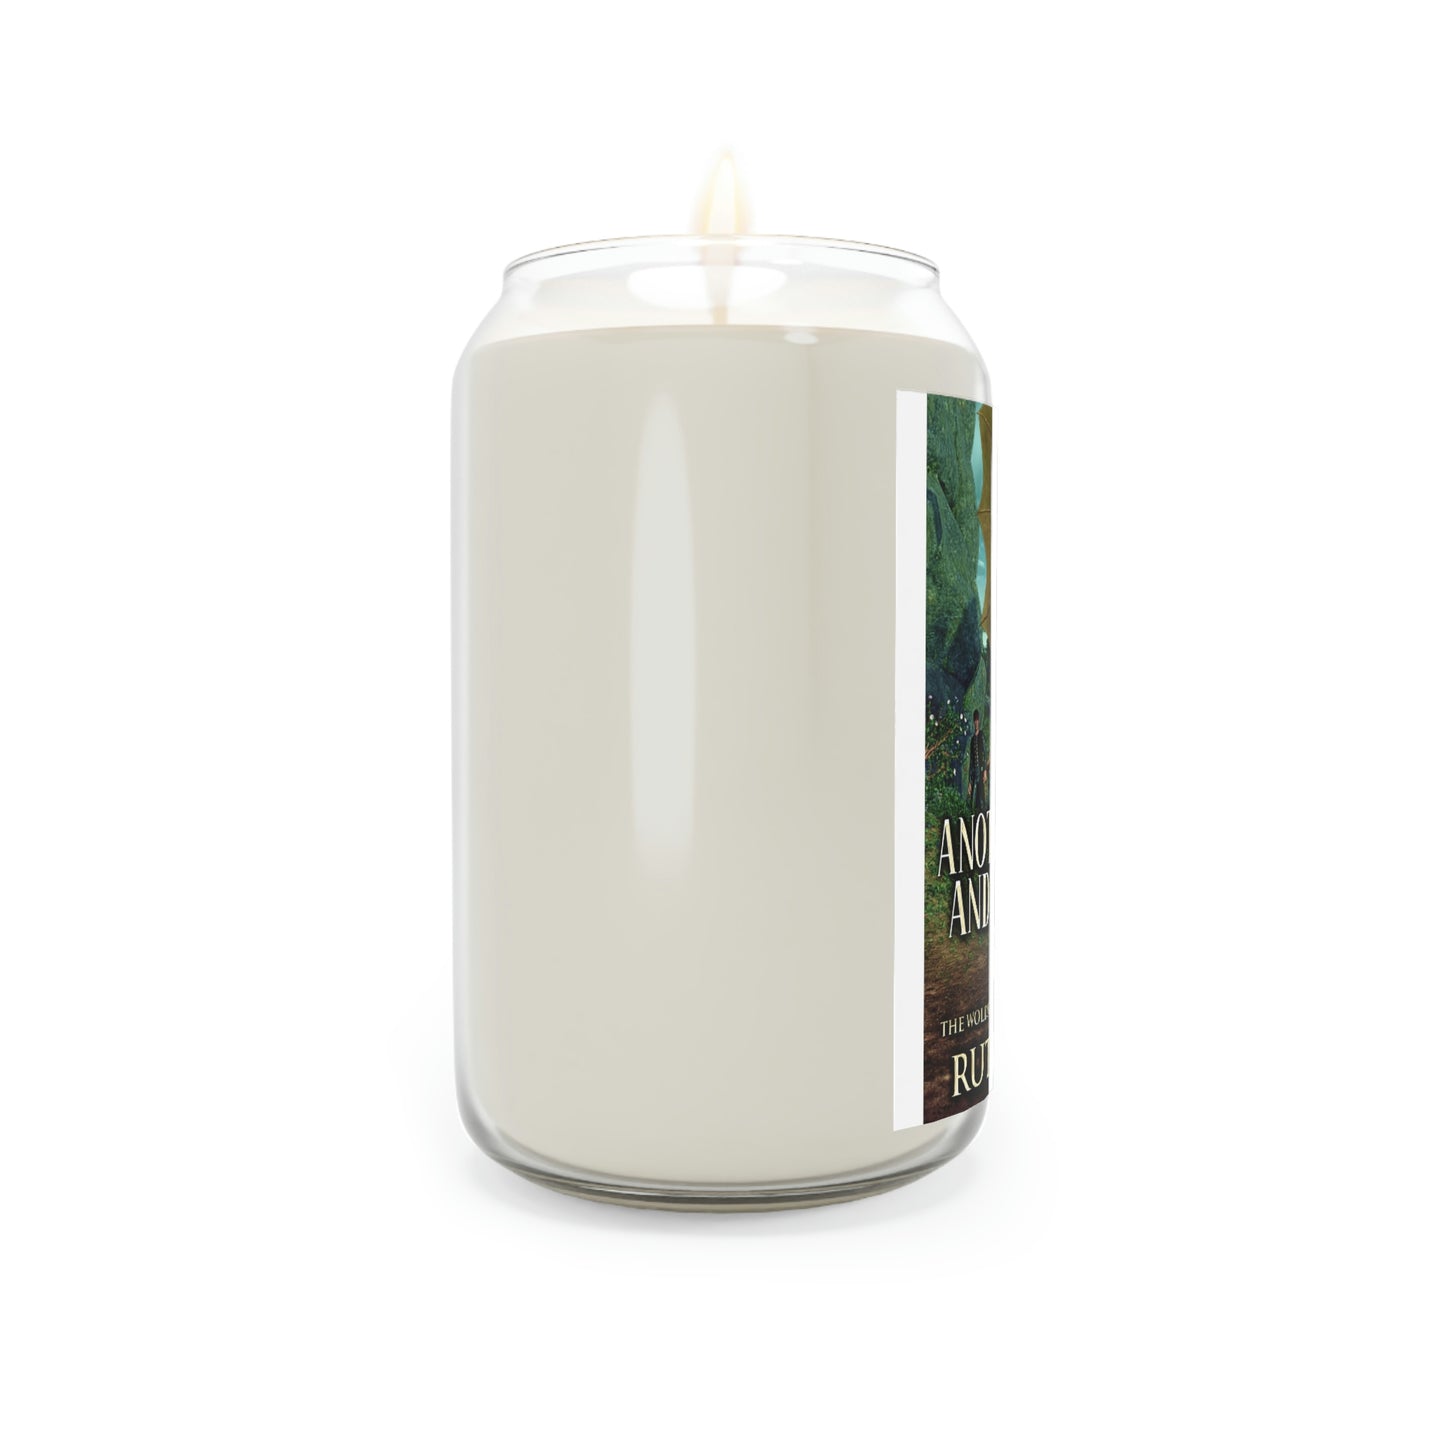 Another Green and Pleasant Land - Scented Candle